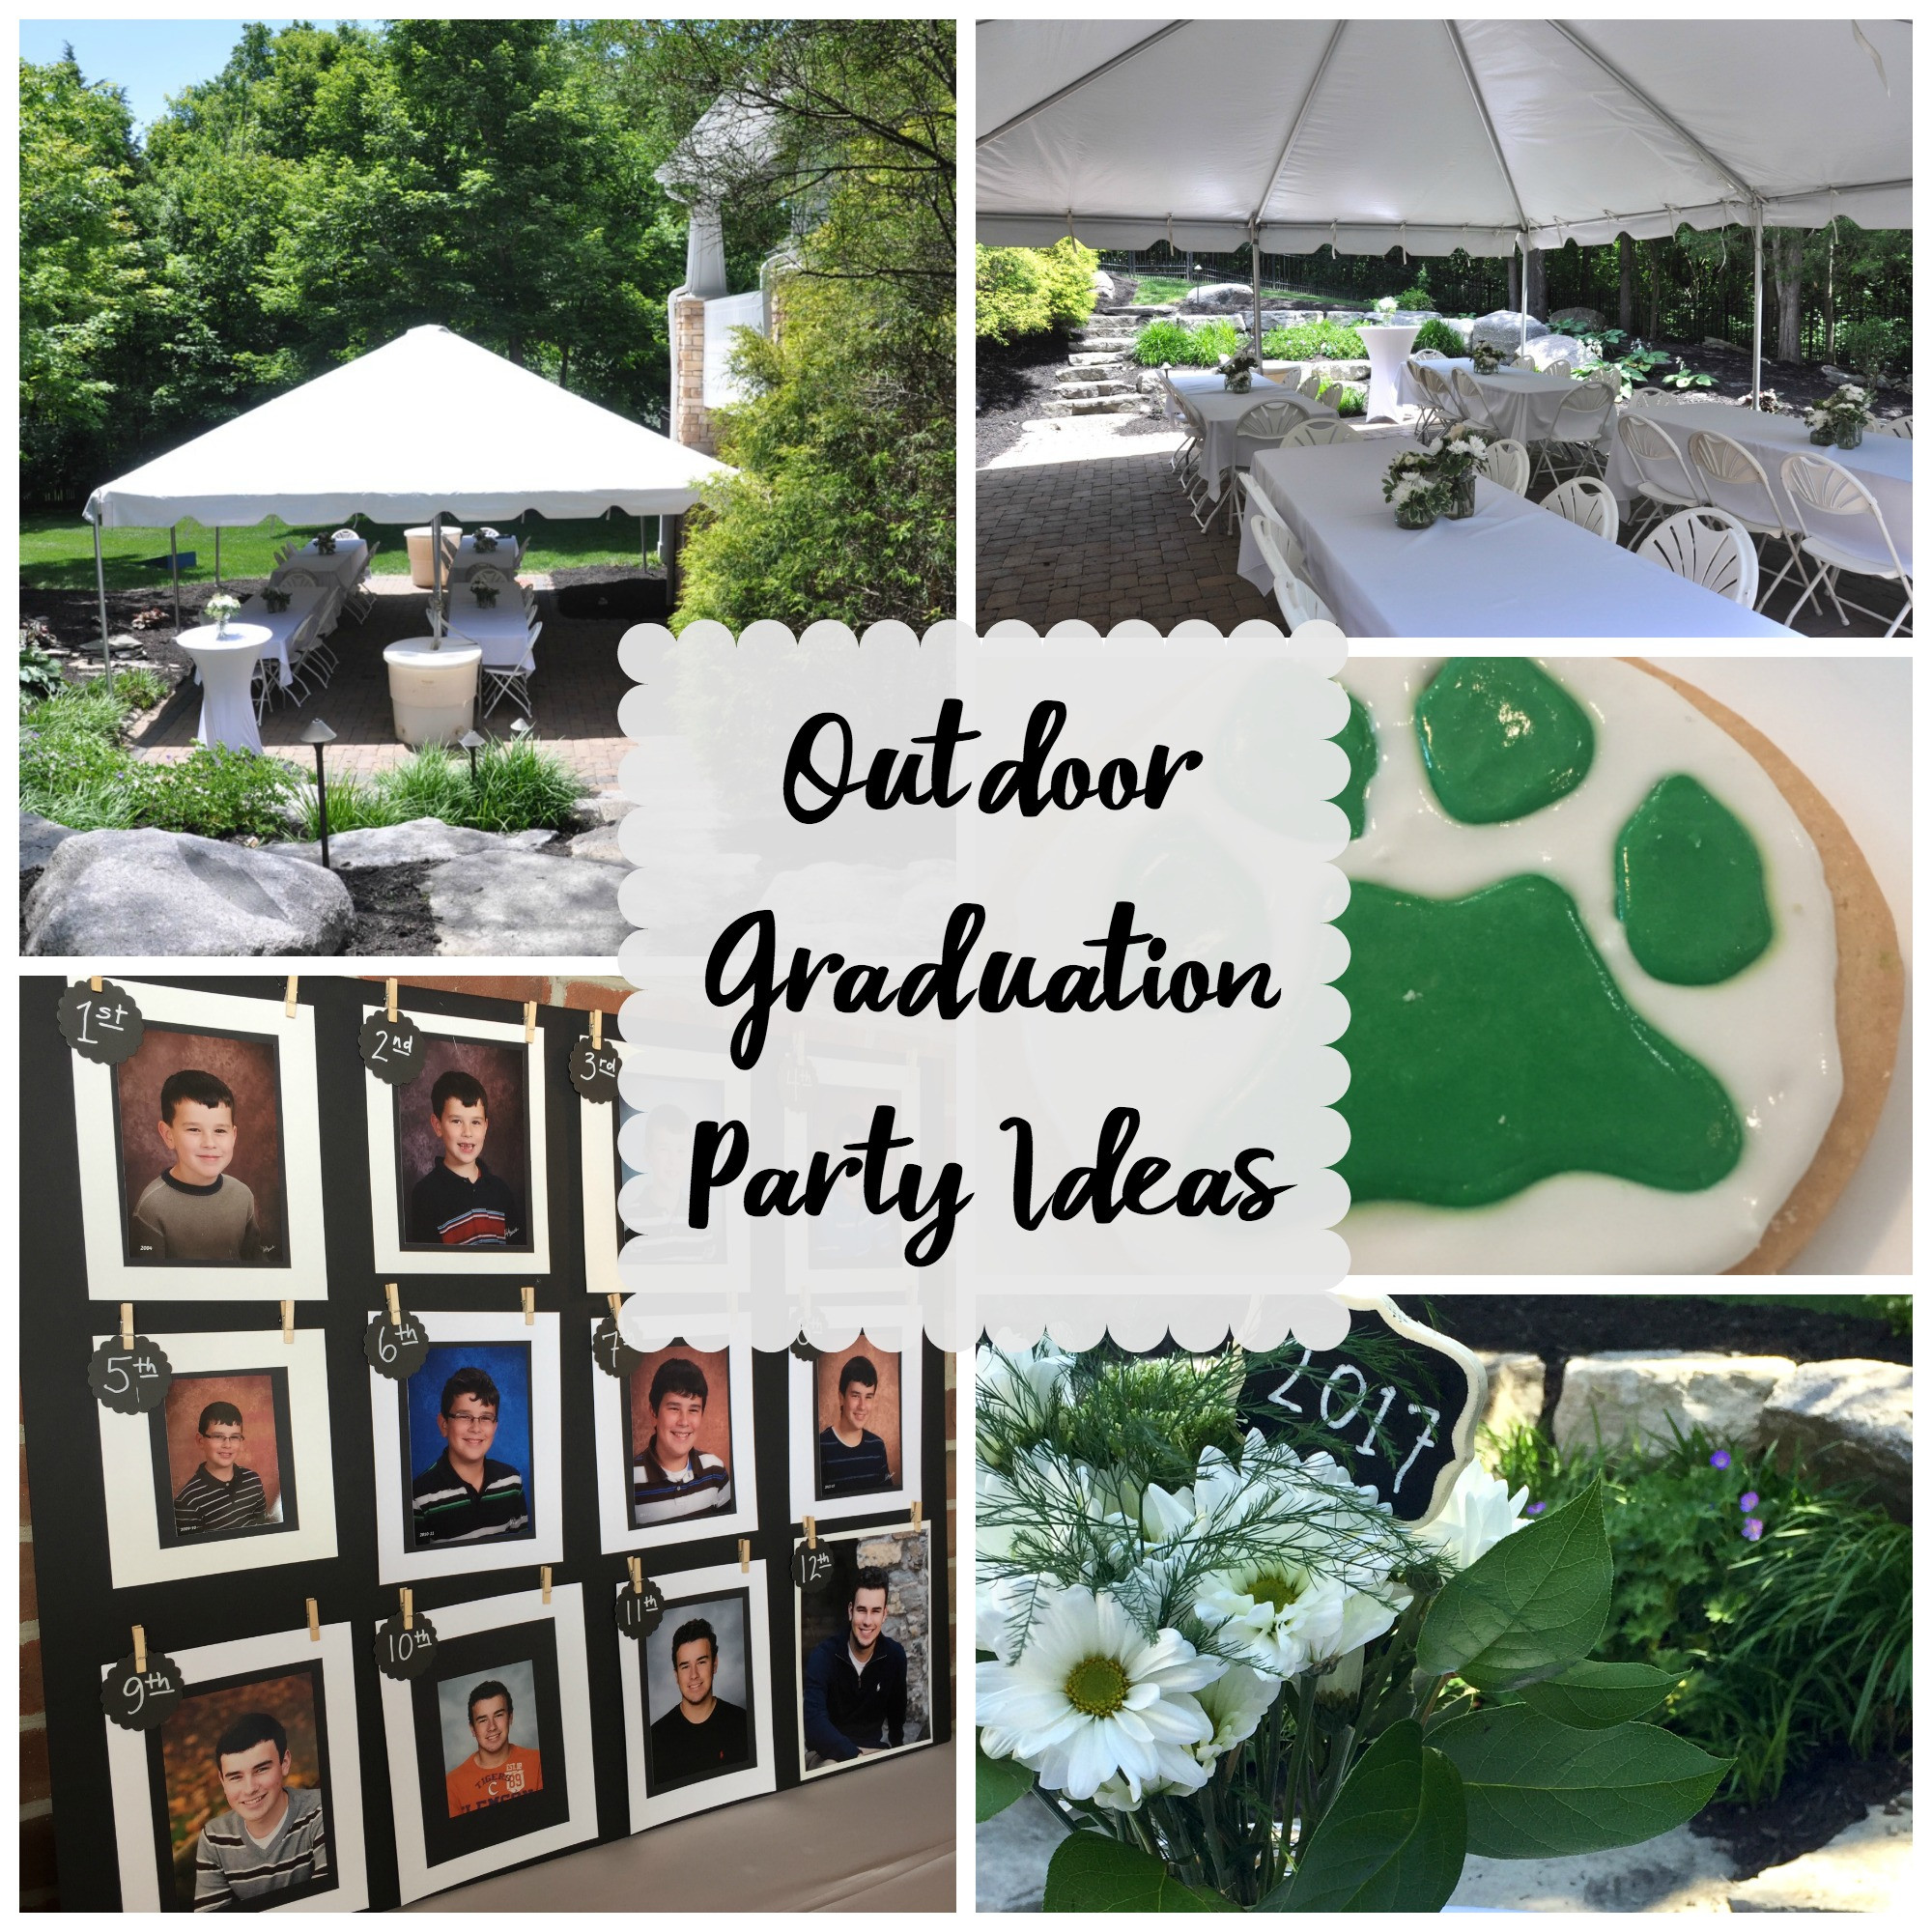 Outdoor Graduation Party Ideas For Guys
 Outdoor Graduation Party Evolution of Style